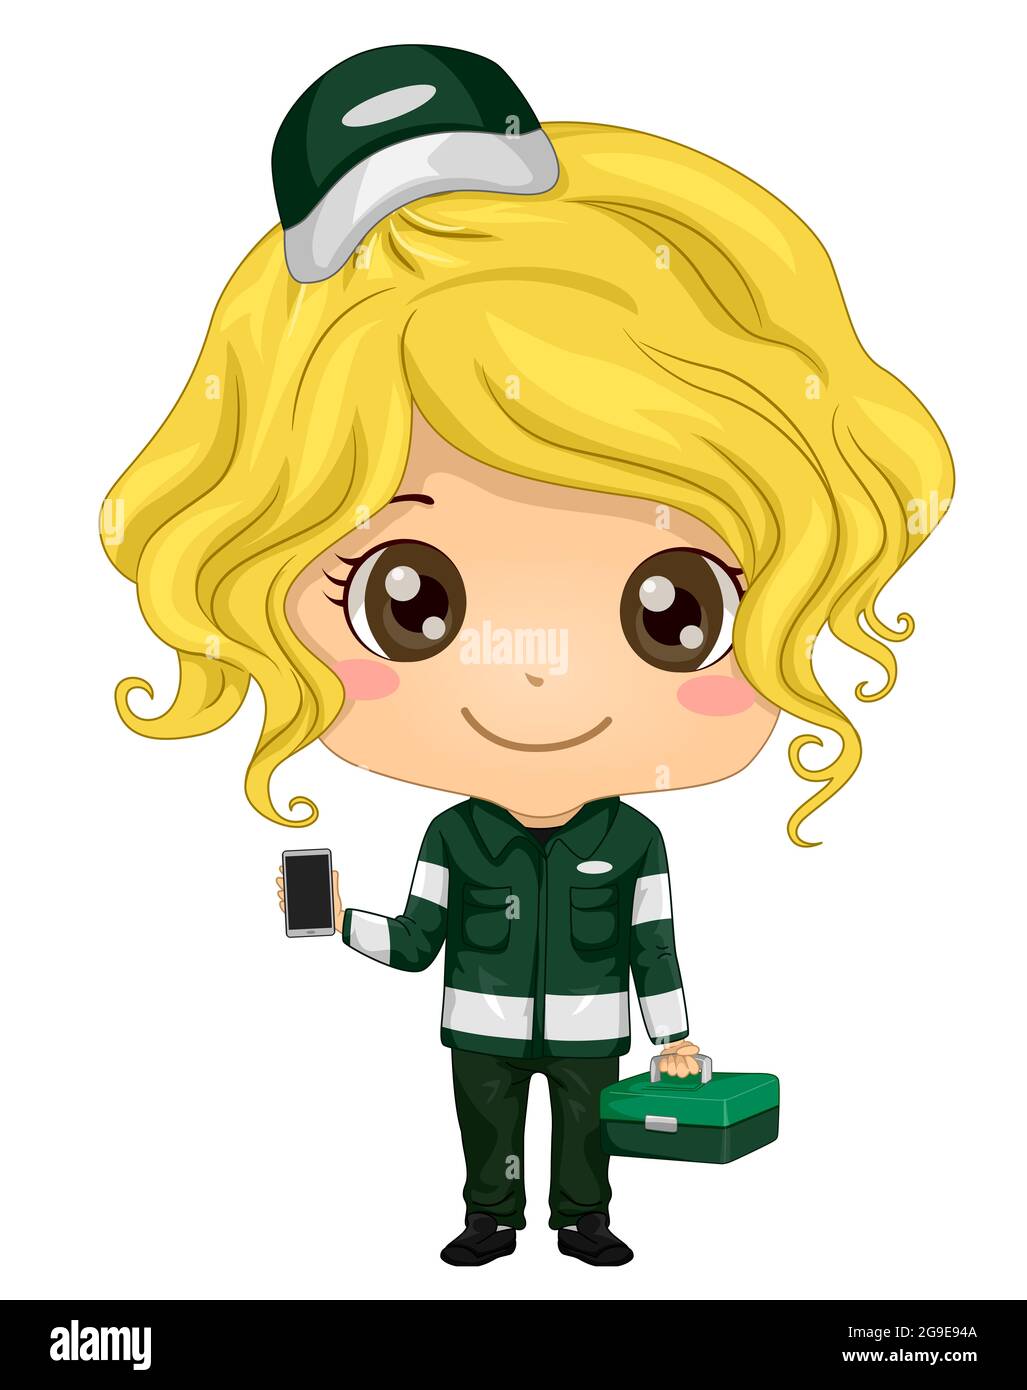 Illustration of a Kid Girl in Paramedic Uniform Flashing Her Mobile Phone and Holding a First Aid Kit Stock Photo